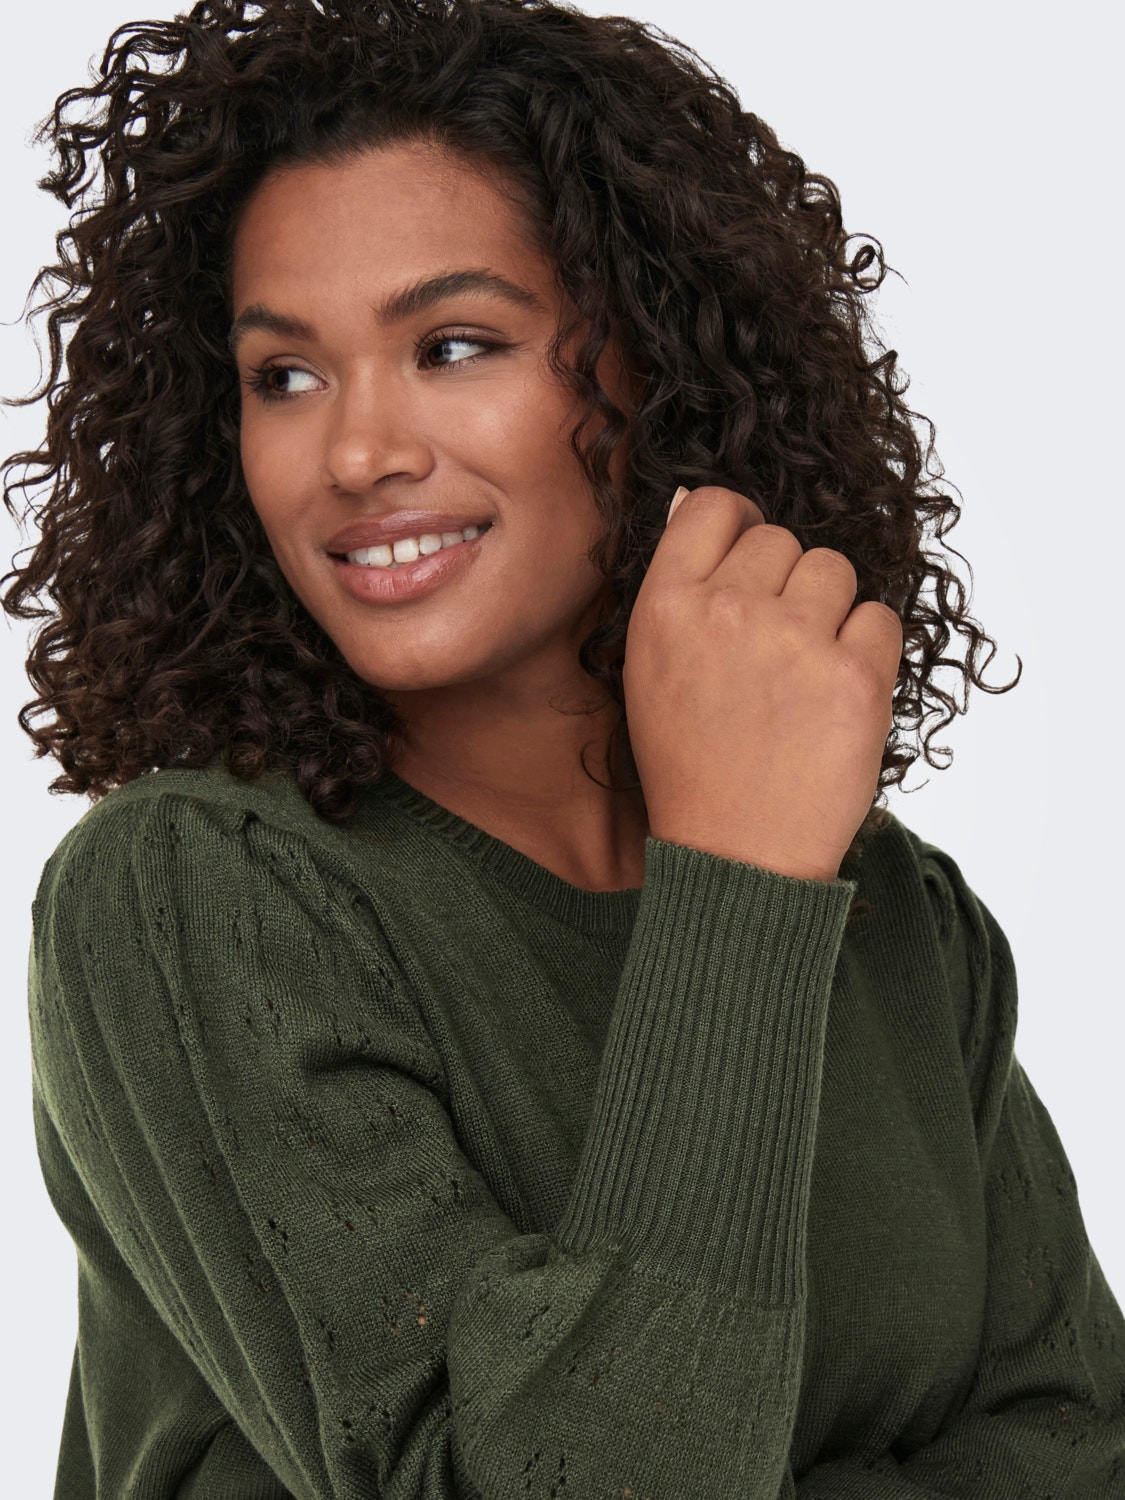 ONLY O-hals Pofmouwen Pullover -Rosin - 15231765